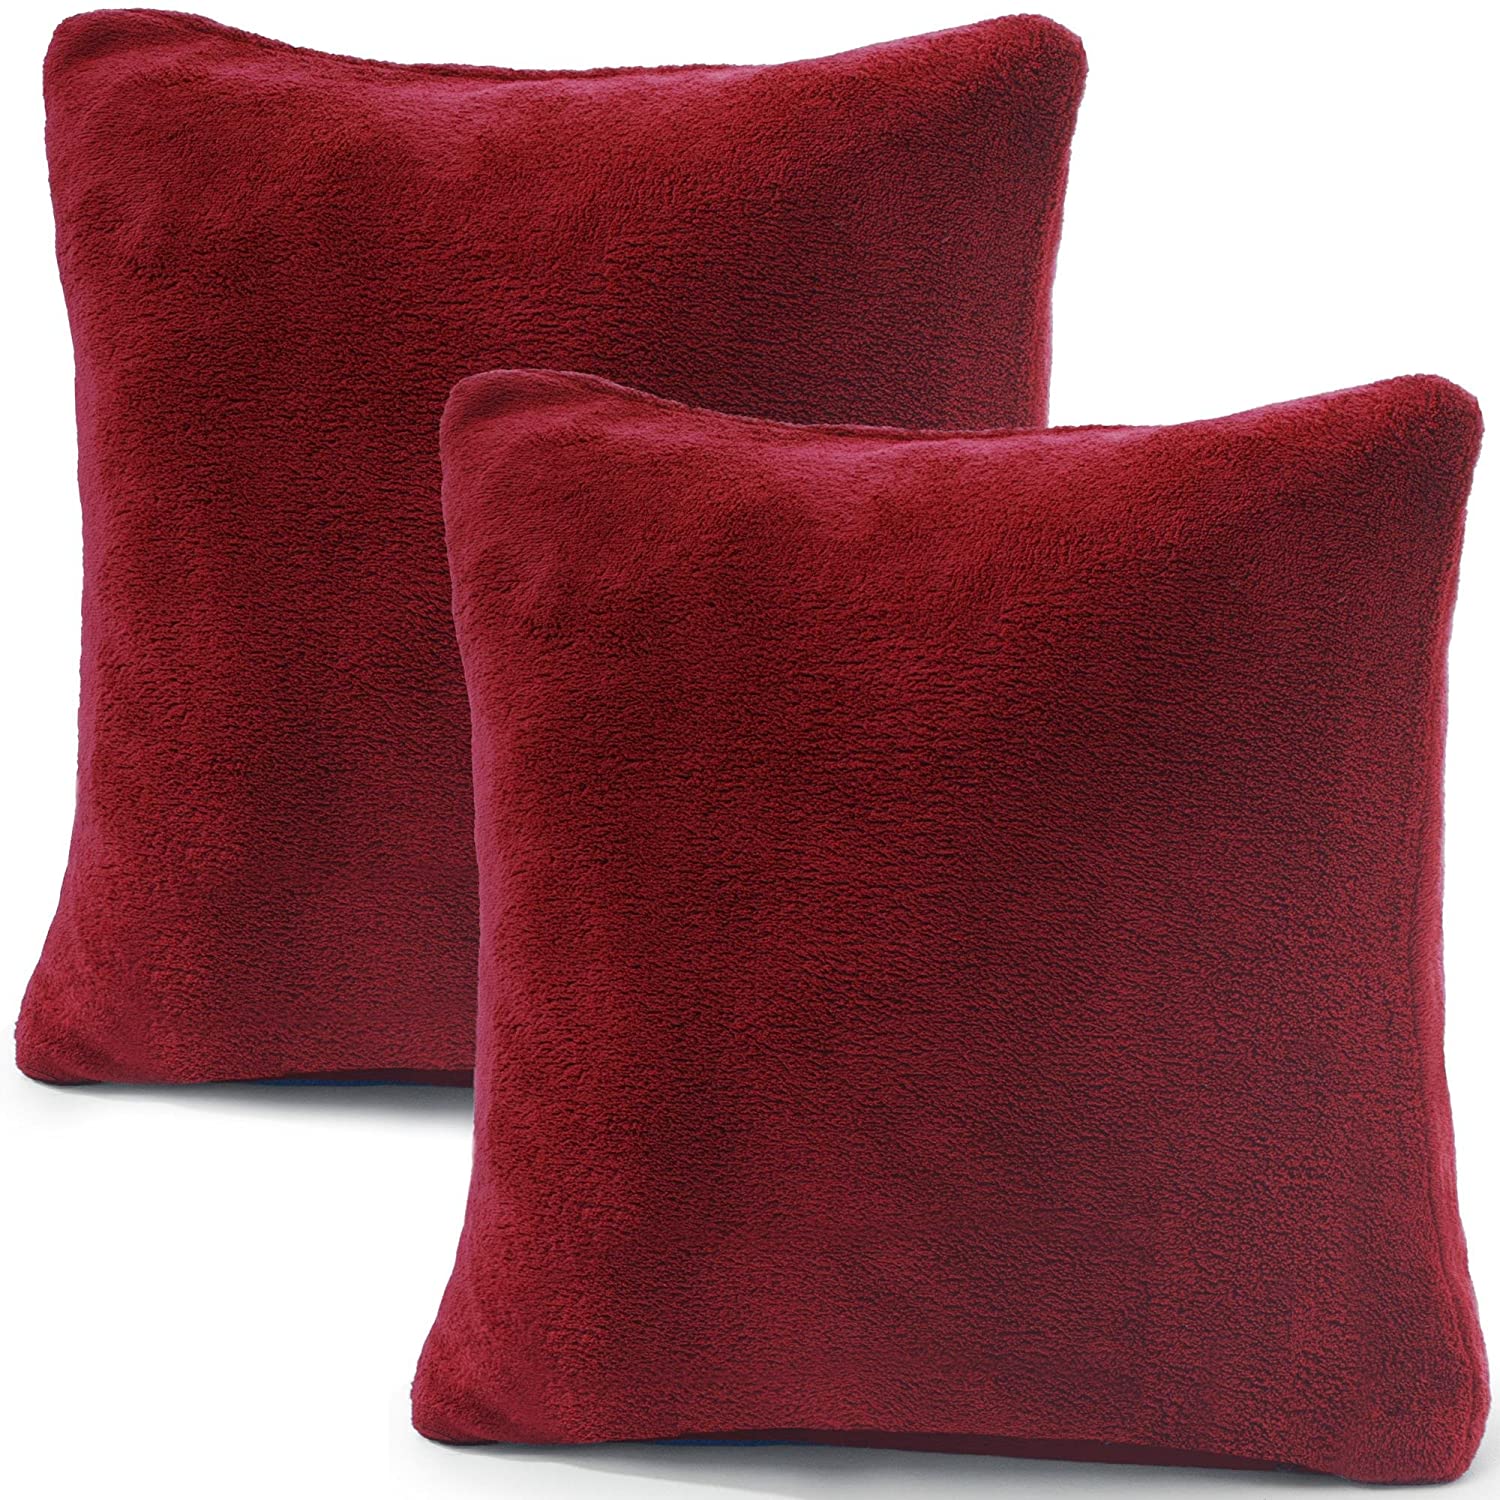 Celinatex Set Of 2 Cushion Covers 40 X 40 Cm Double Pack Coral Fleece Cushi